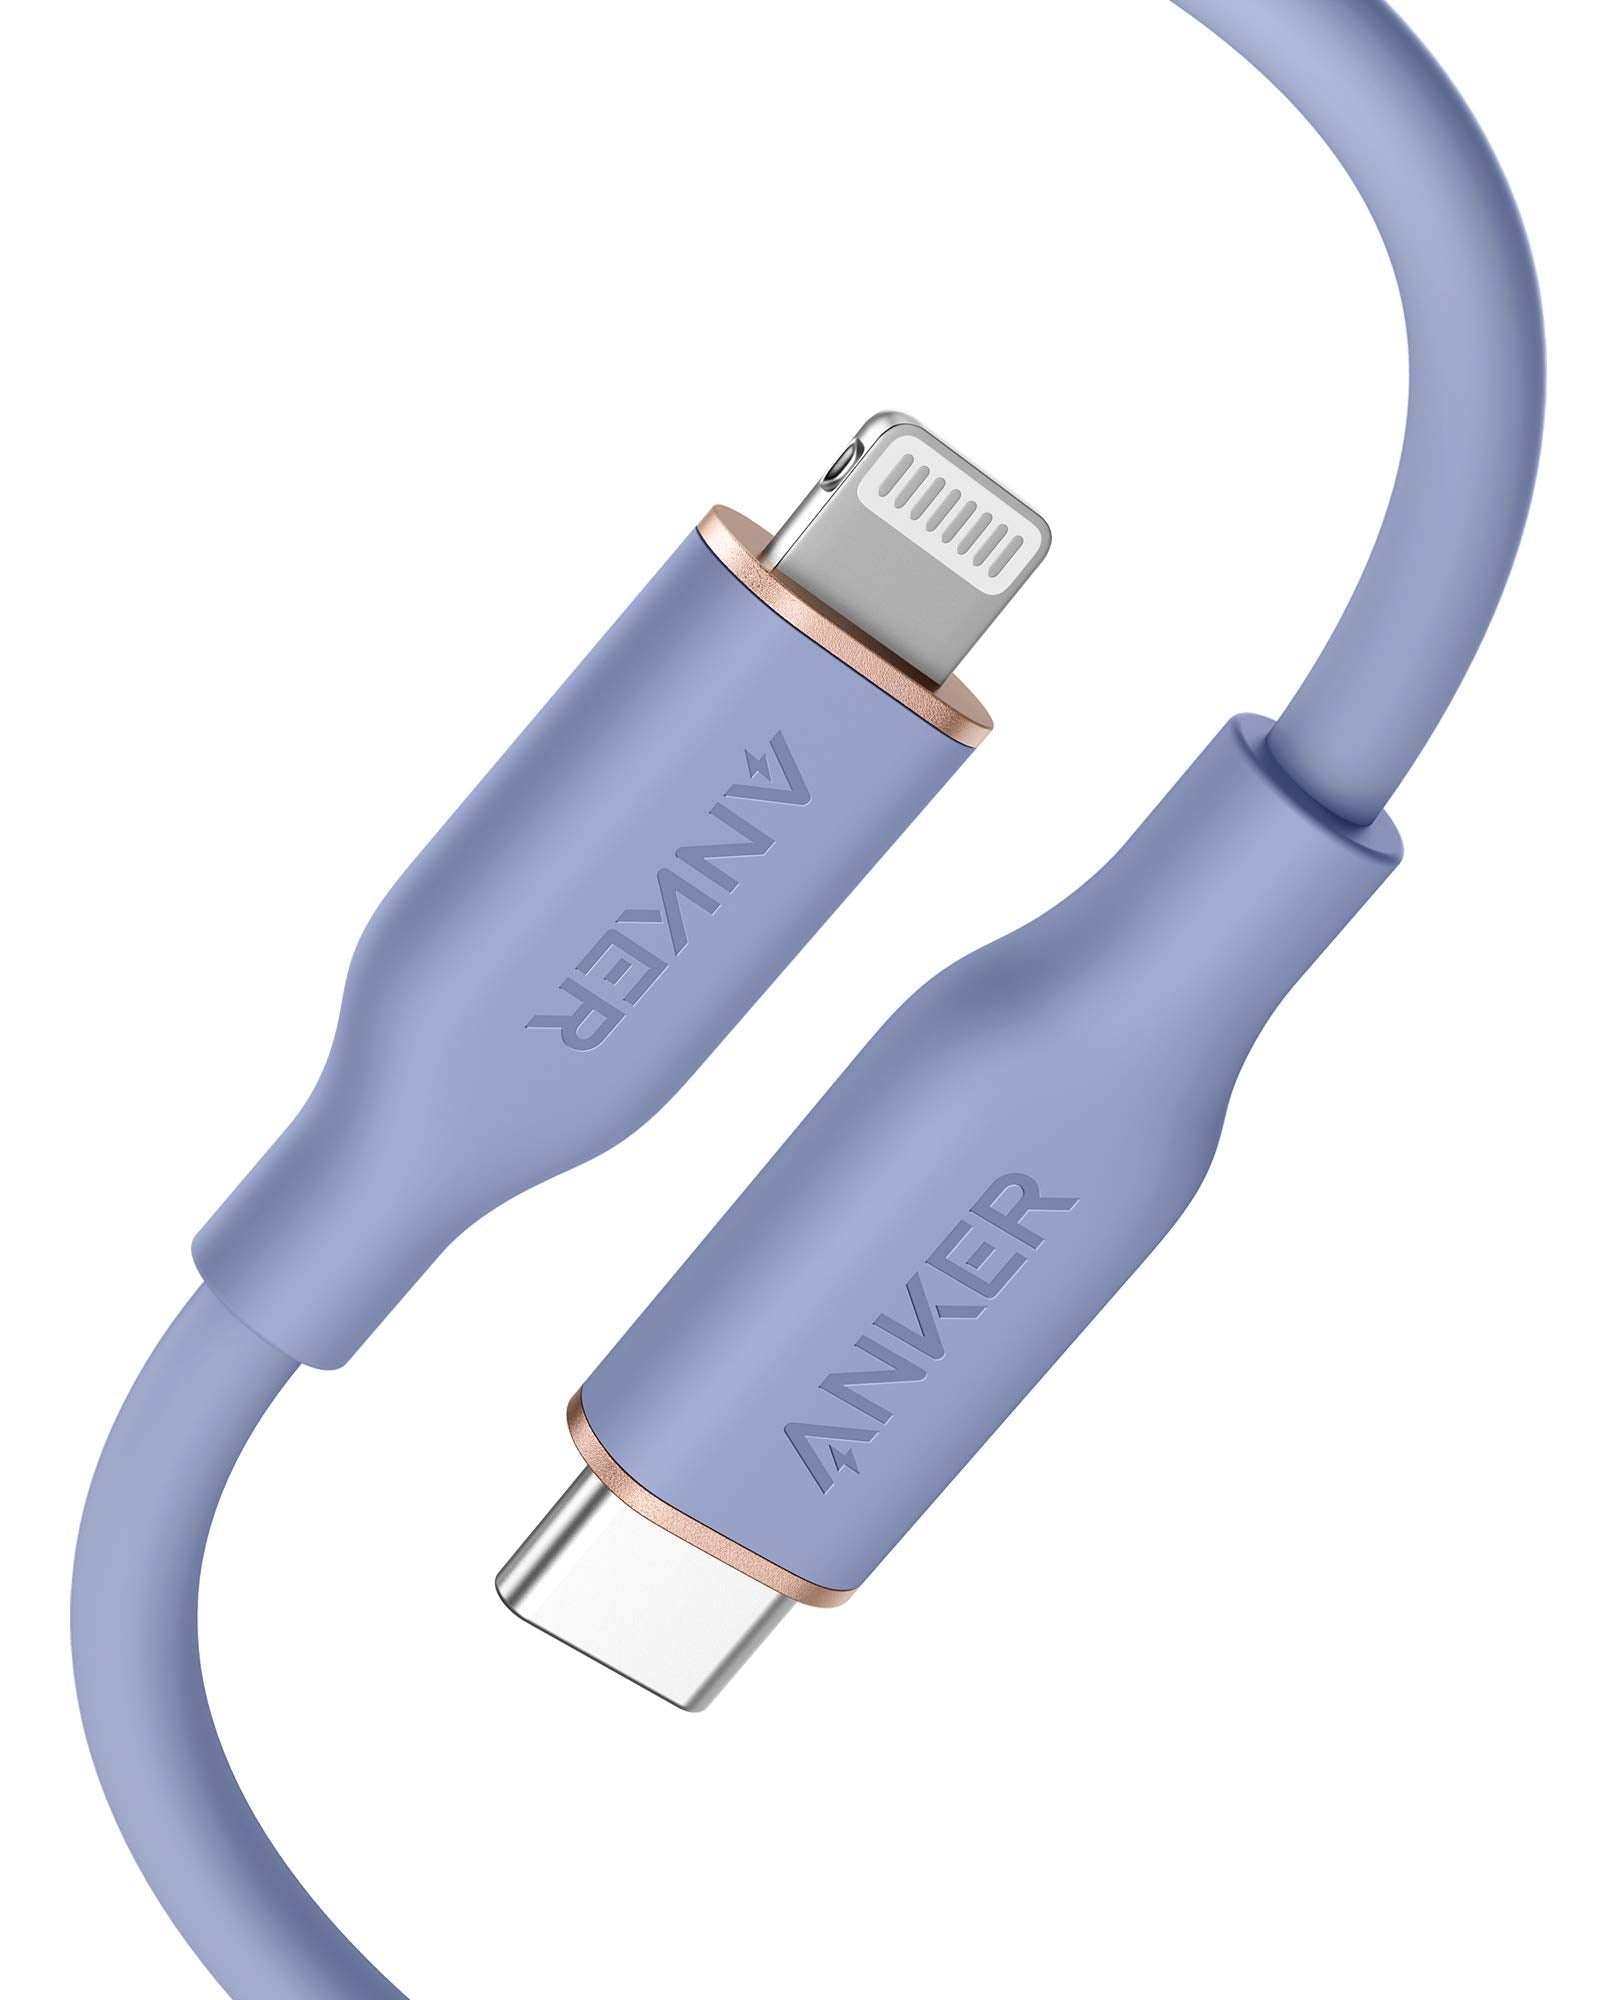  Anker USB-C to Lightning Cable, 641 Cable (Midnight